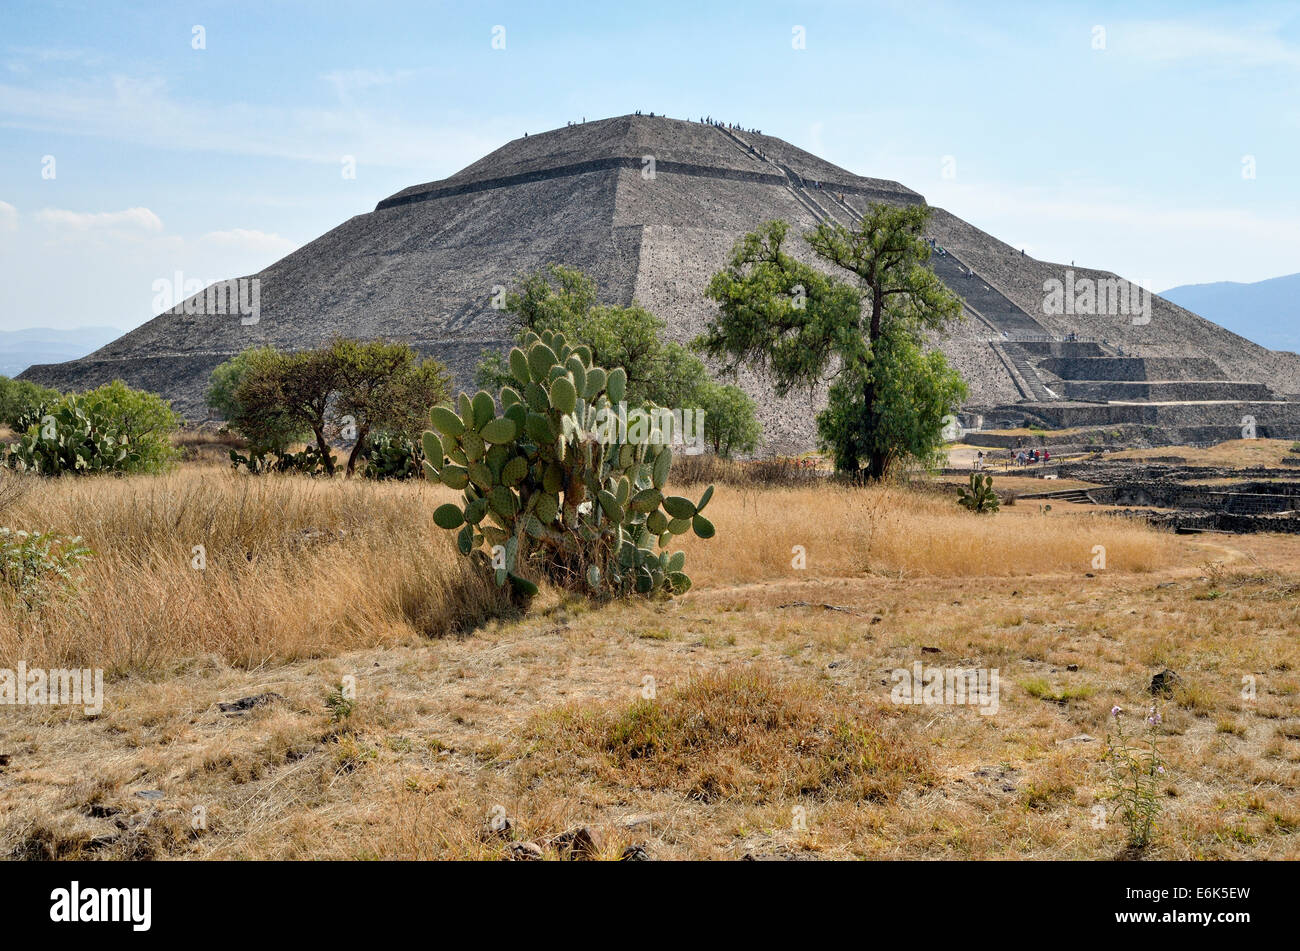 Pyramid del Sol or Pyramid of the Sun, UNESCO World Heritage Site Archaeological Site of Teotihuacan, México, Mexico Stock Photo